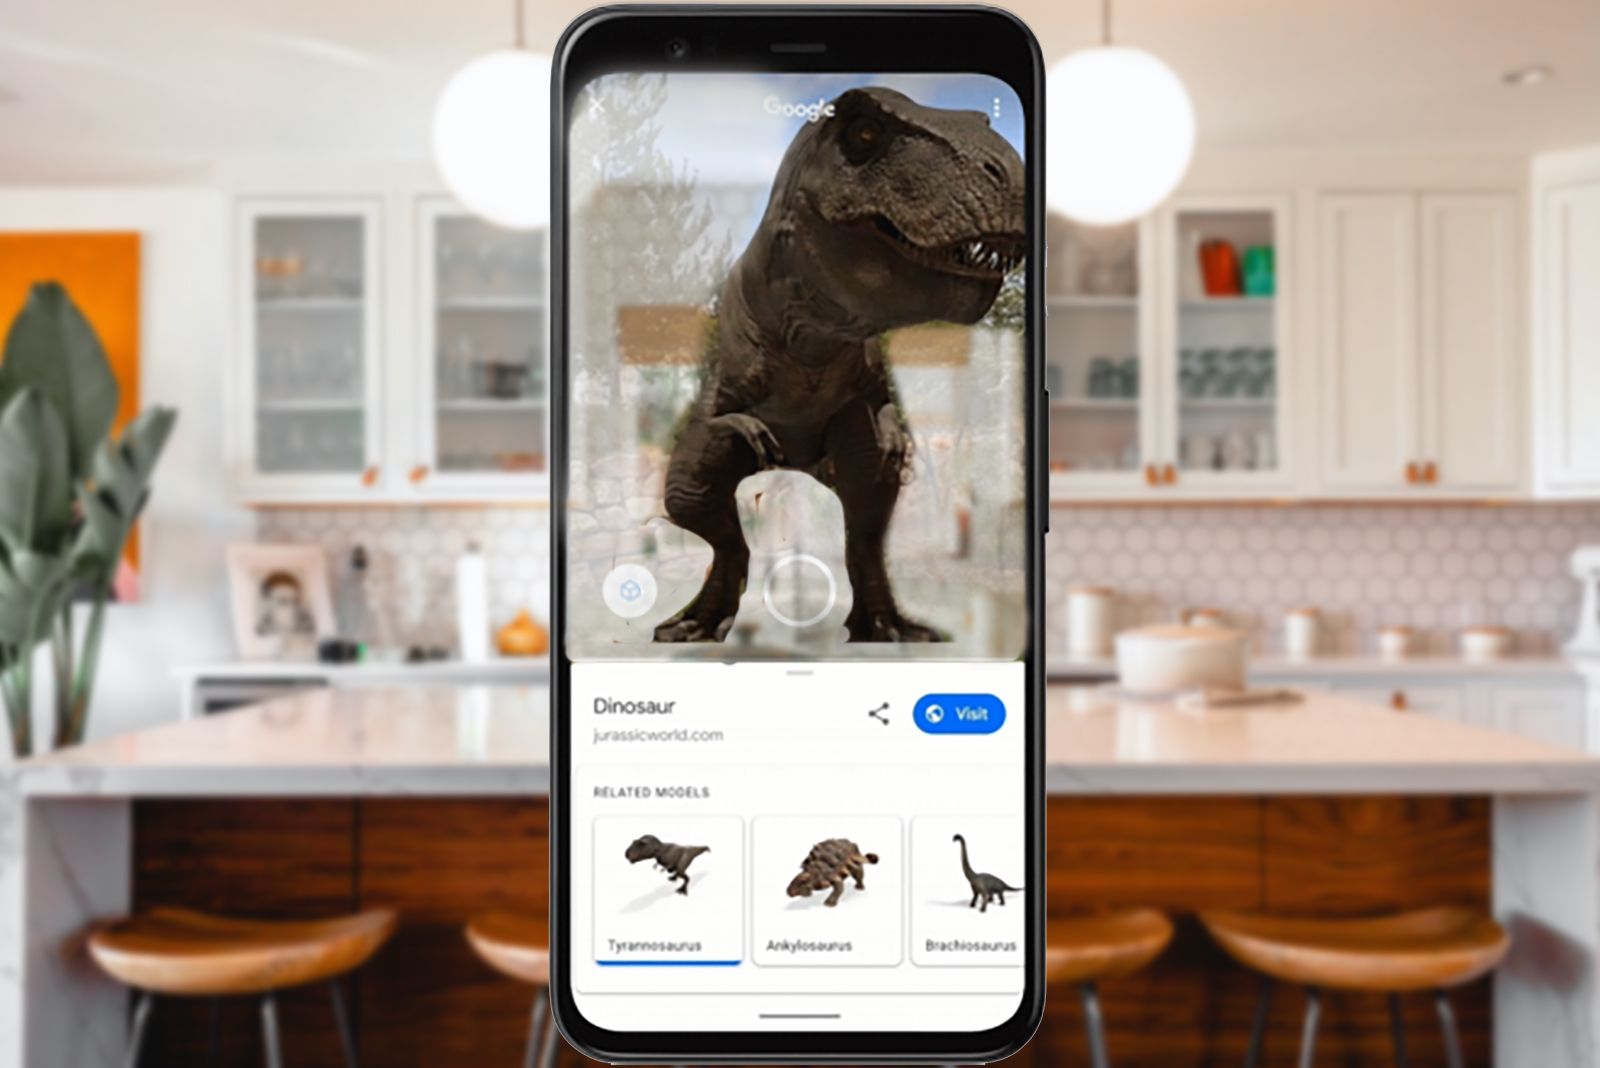 Google 3D objects: How to view dinosaurs in AR right in your kitchen photo 2